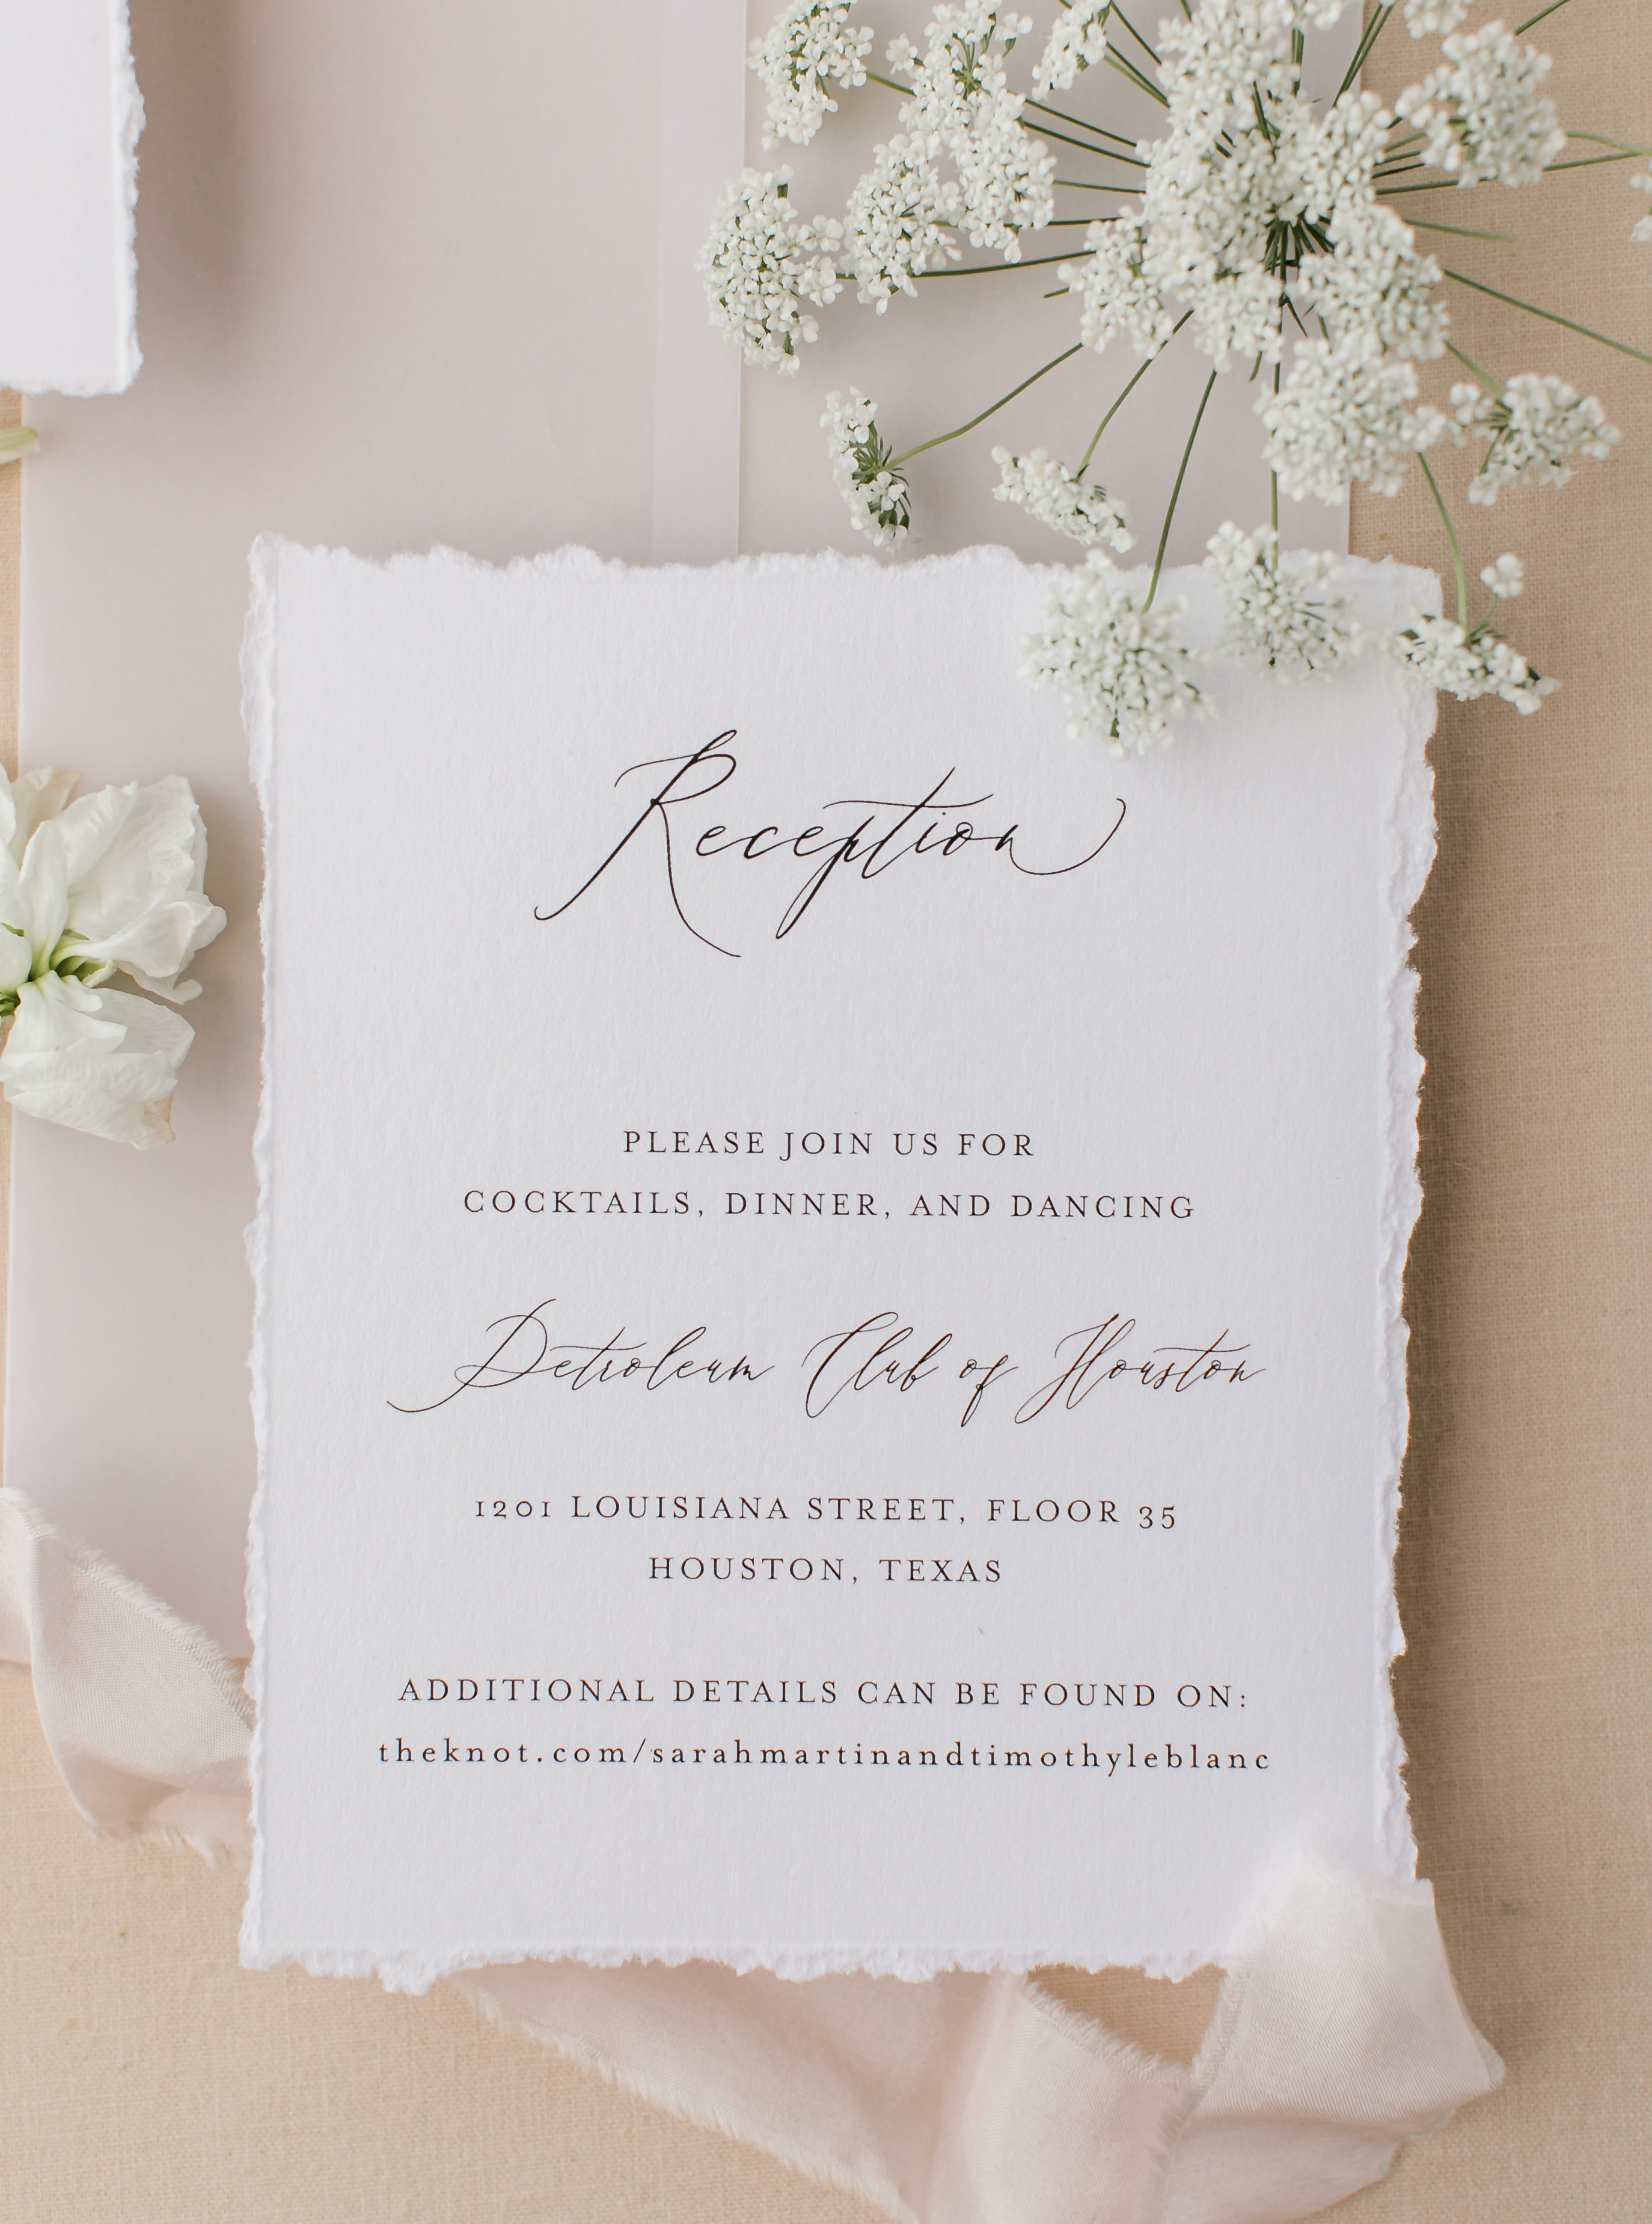 A reception invitation for an airy blush and sage wedding at The Petroleum Club in Houston.